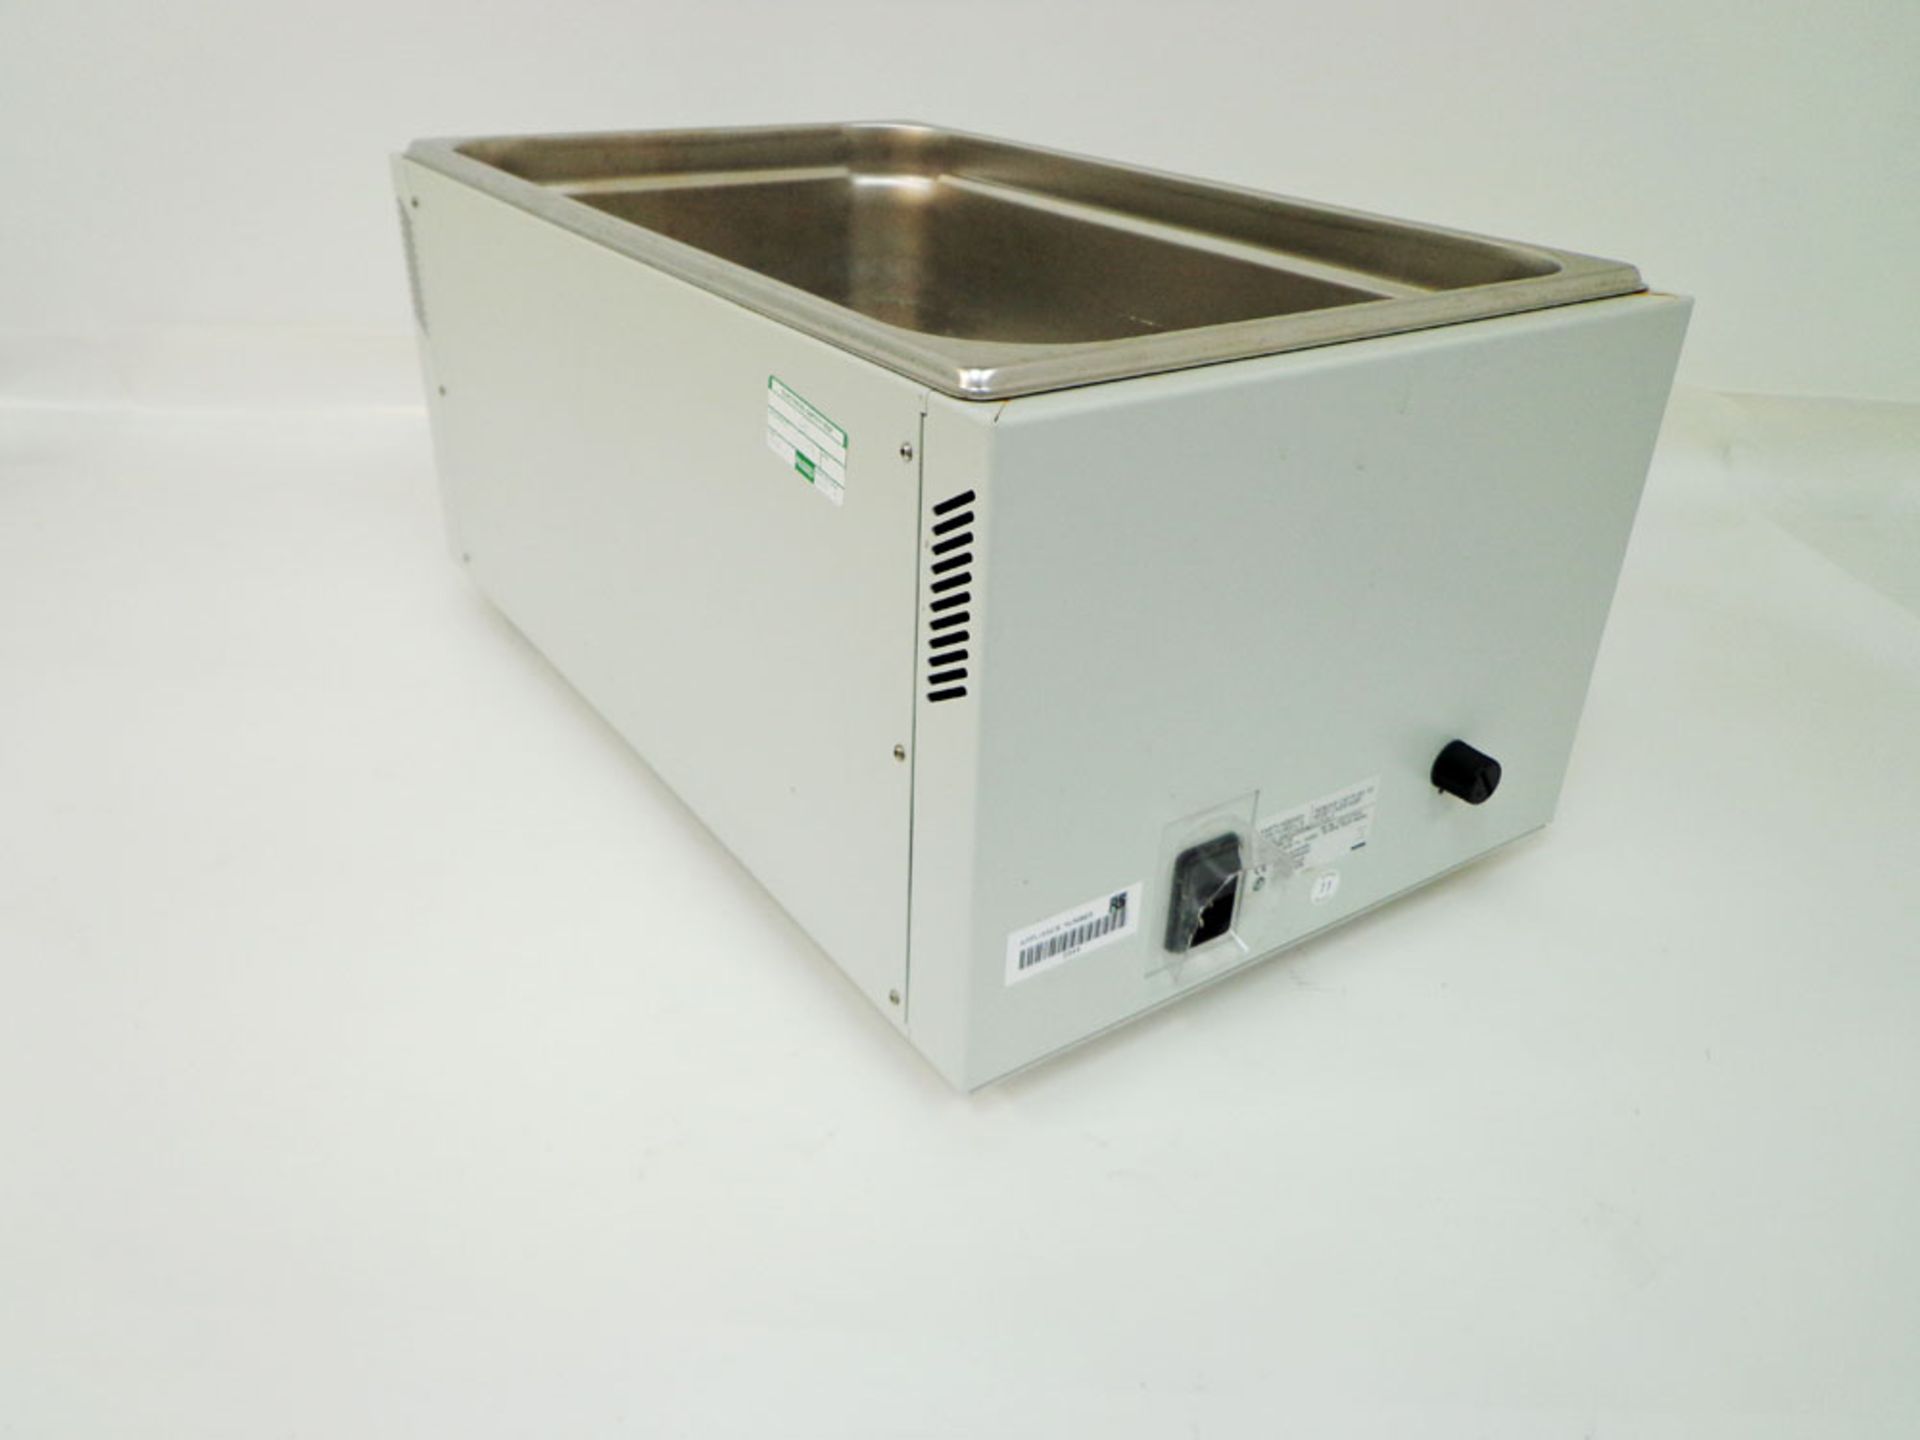 Fisher Scientific Water Bath DMU19, Without Lid, serial number 1Z0737006 (Ref: WA11843) - Image 3 of 5